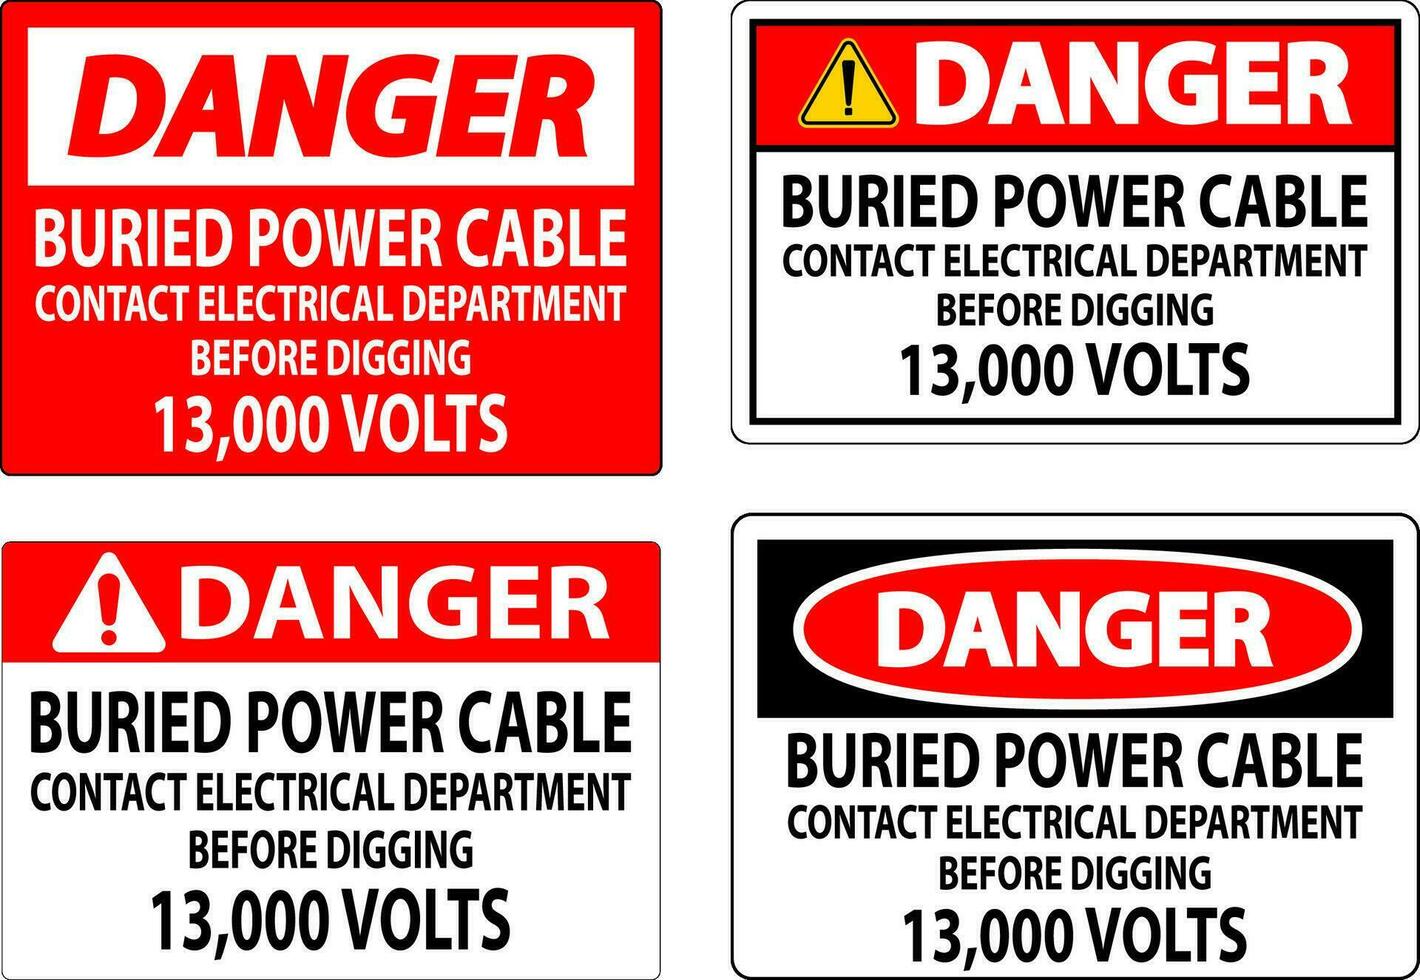 Danger Sign Buried Power Cable Contact Electrical Department Before Digging 13,000 Volts vector